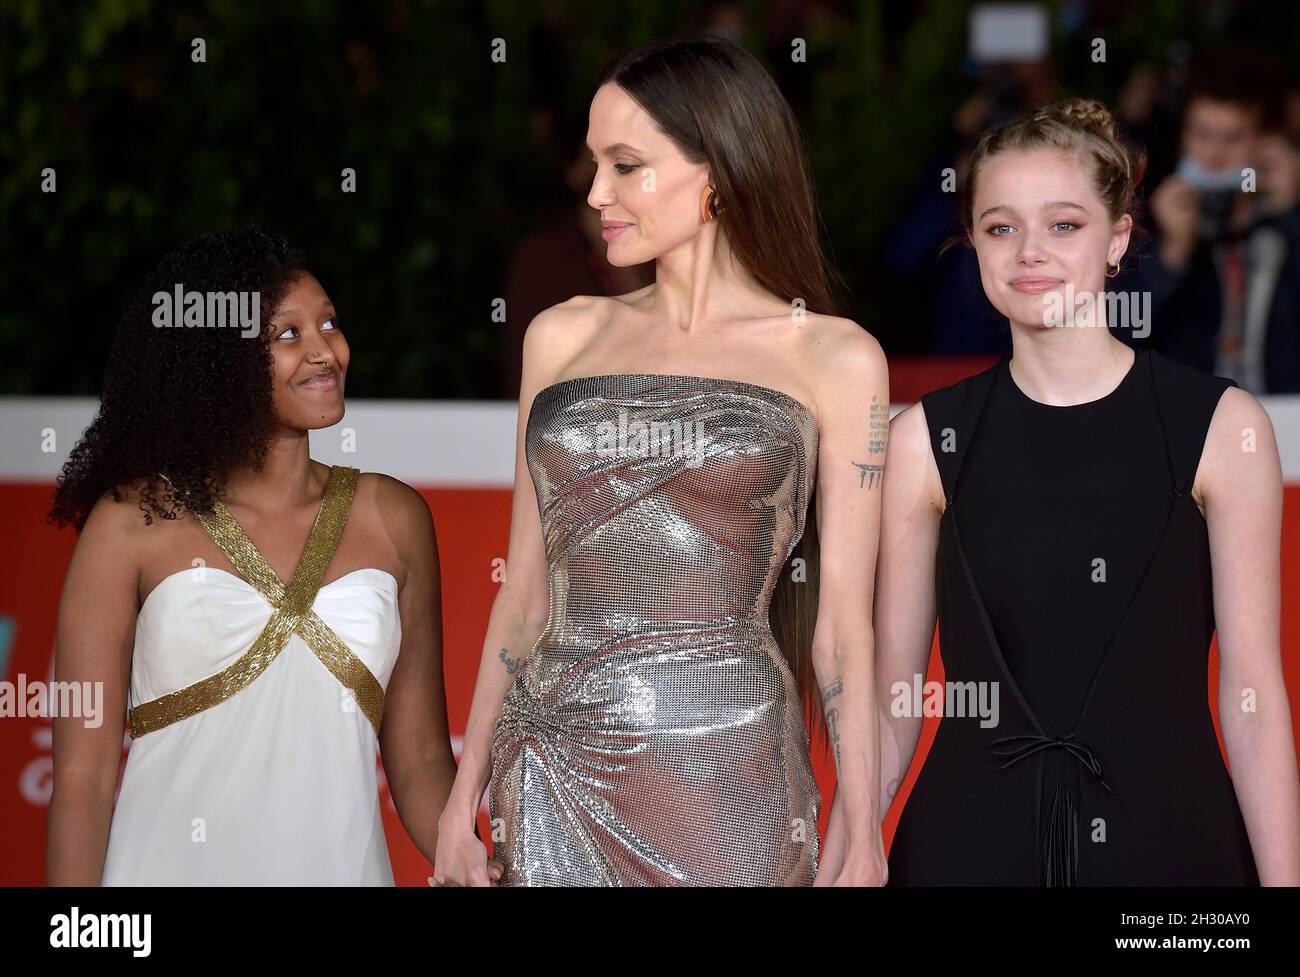 Rome, Italy. 24th Oct, 2021. ROME, ITALY - OCTOBER 24 Zahara Marley Jolie-Pitt, Angelina Jolie, Shiloh Jolie-Pitt, attends the red carpet of the movie 'Eternals' during the 16th Rome Film Fest 2021 on October 24, 2021 in Rome, Italy. Credit: dpa/Alamy Live News Stock Photo